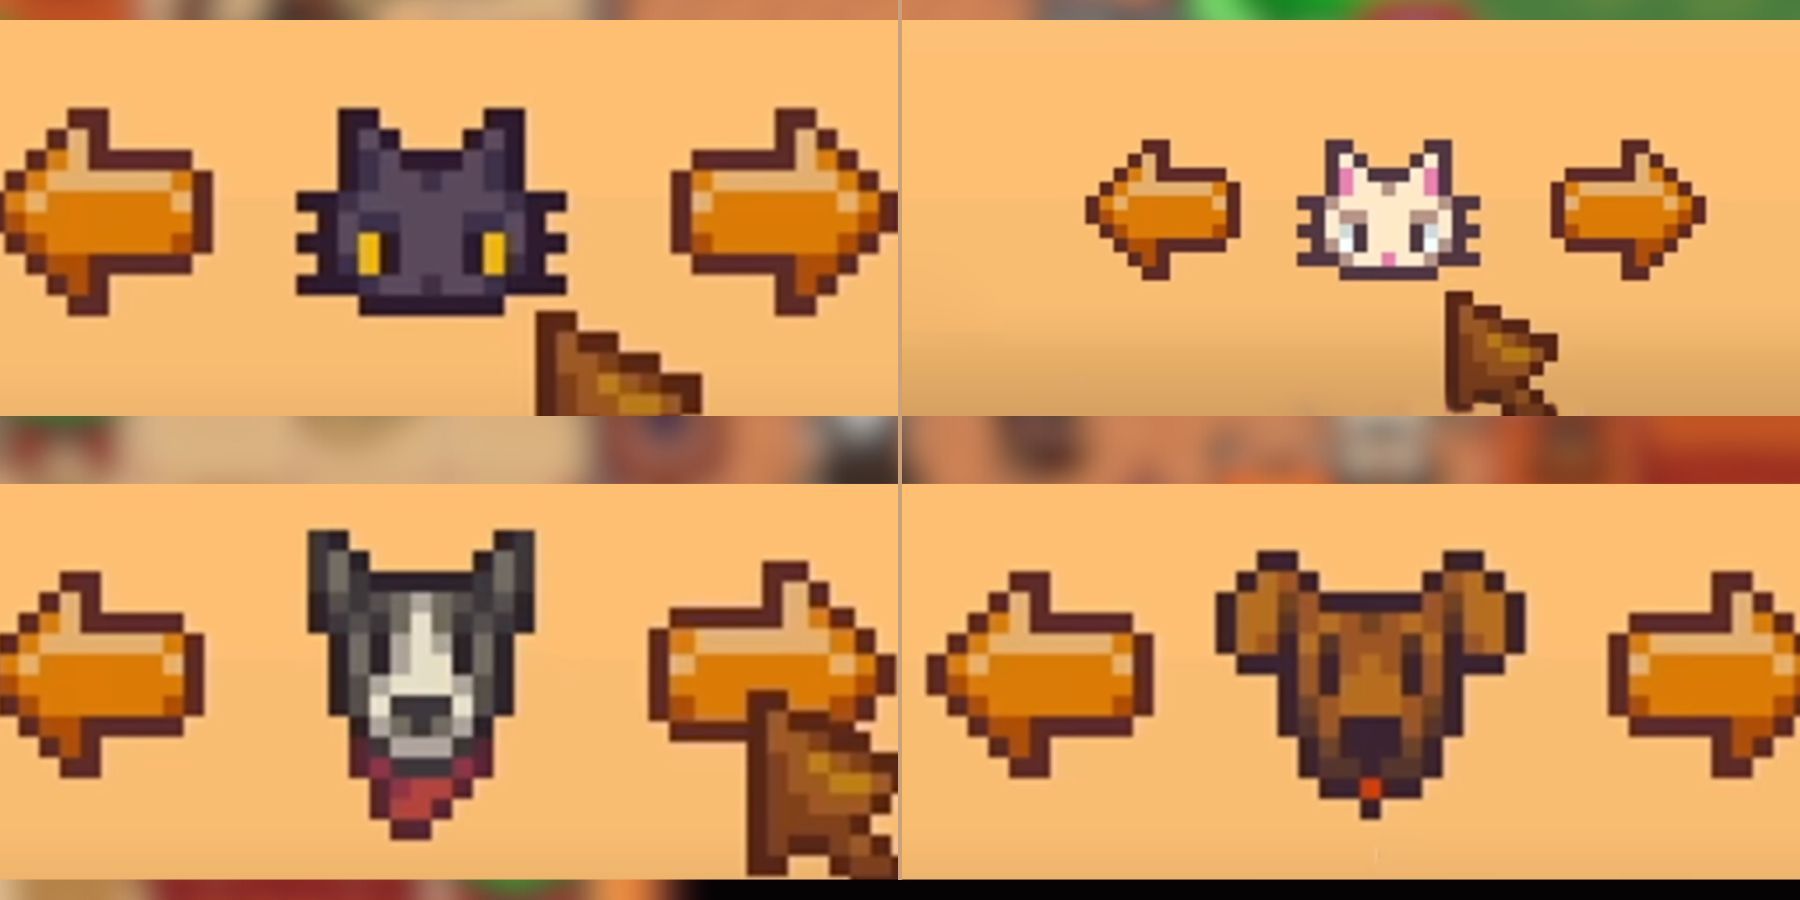 all new pet variants in stardew valley 1.6.